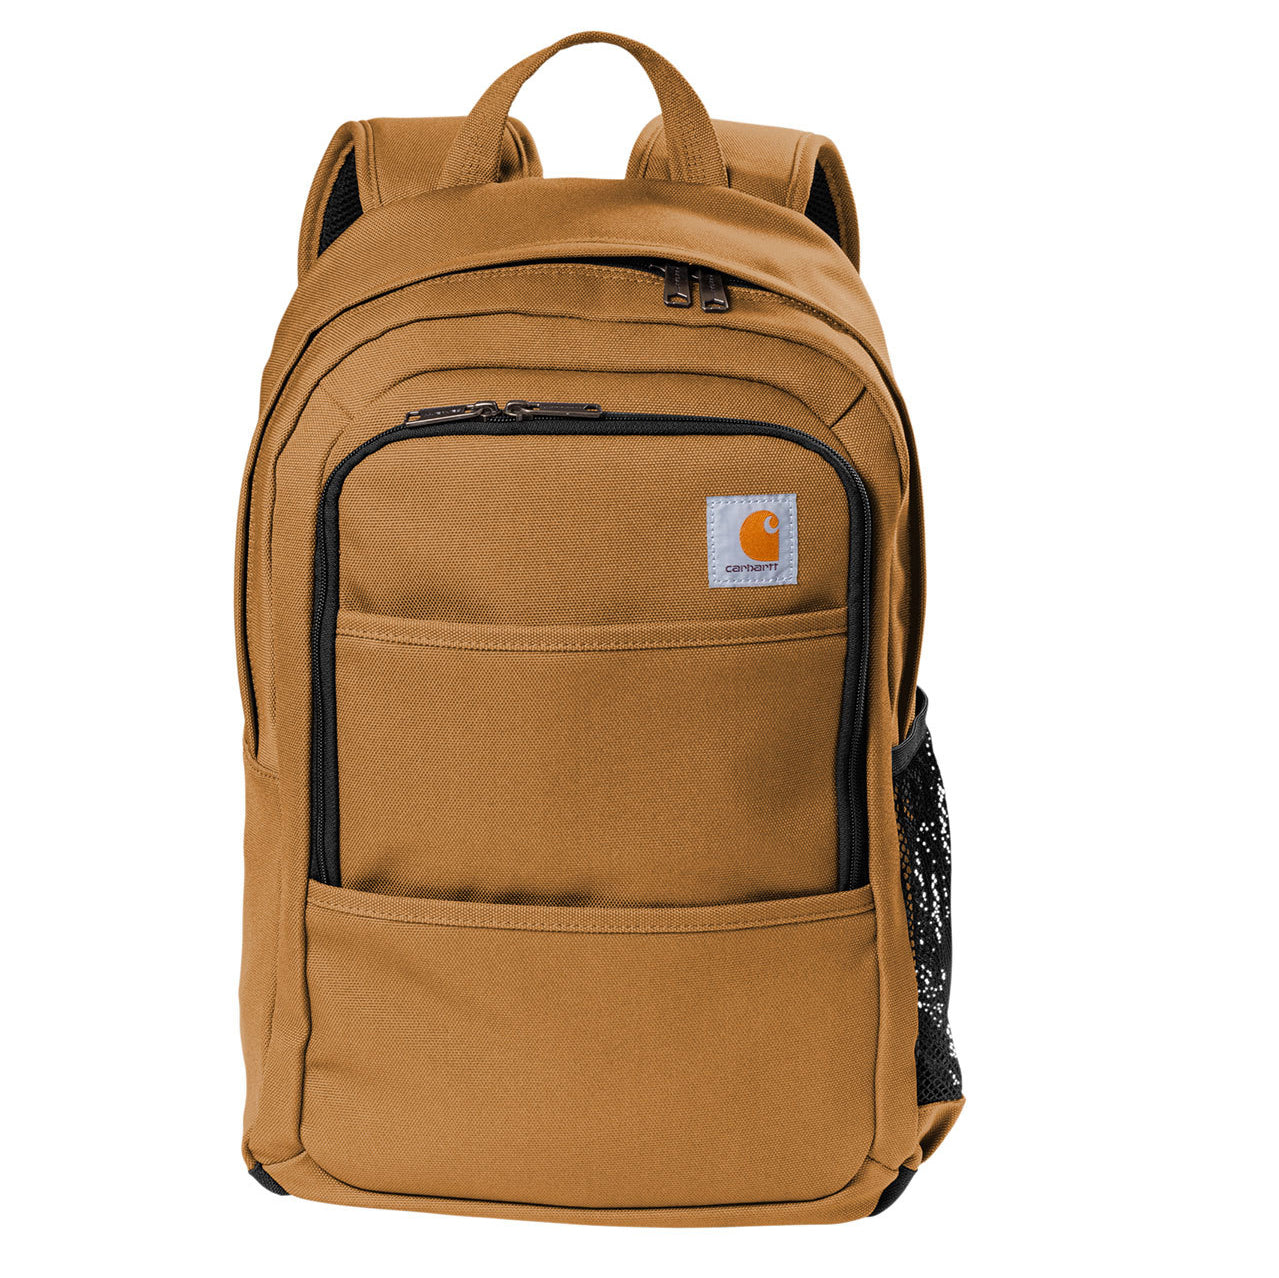 Carhartt® Foundry Series Backpack with Embroidery